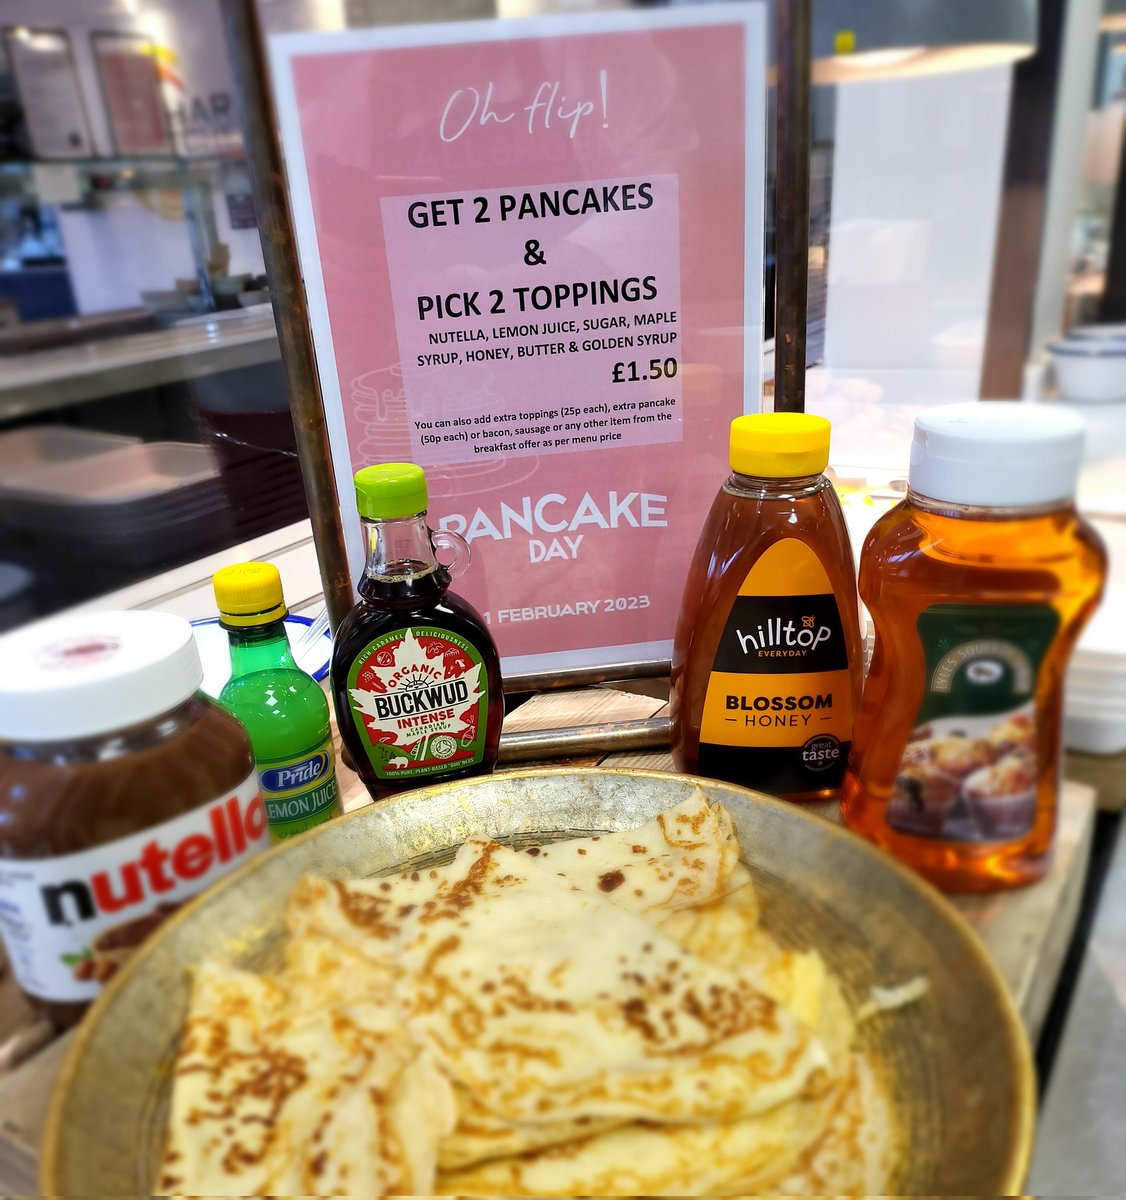 Oh flip! 😆 Lemon 🍋 juice, sugar, maple 🍁 syrup, Nutella, honey 🍯 butter 🧈 and golden syrup 😋 Fancy a couple of pancakes 🥞 on your plate? 
#pancakes 
#pancakeday 
#shrovetuesday 
#fuelyourindividuality 
#obsessedaboutfood 
@baxterstorey